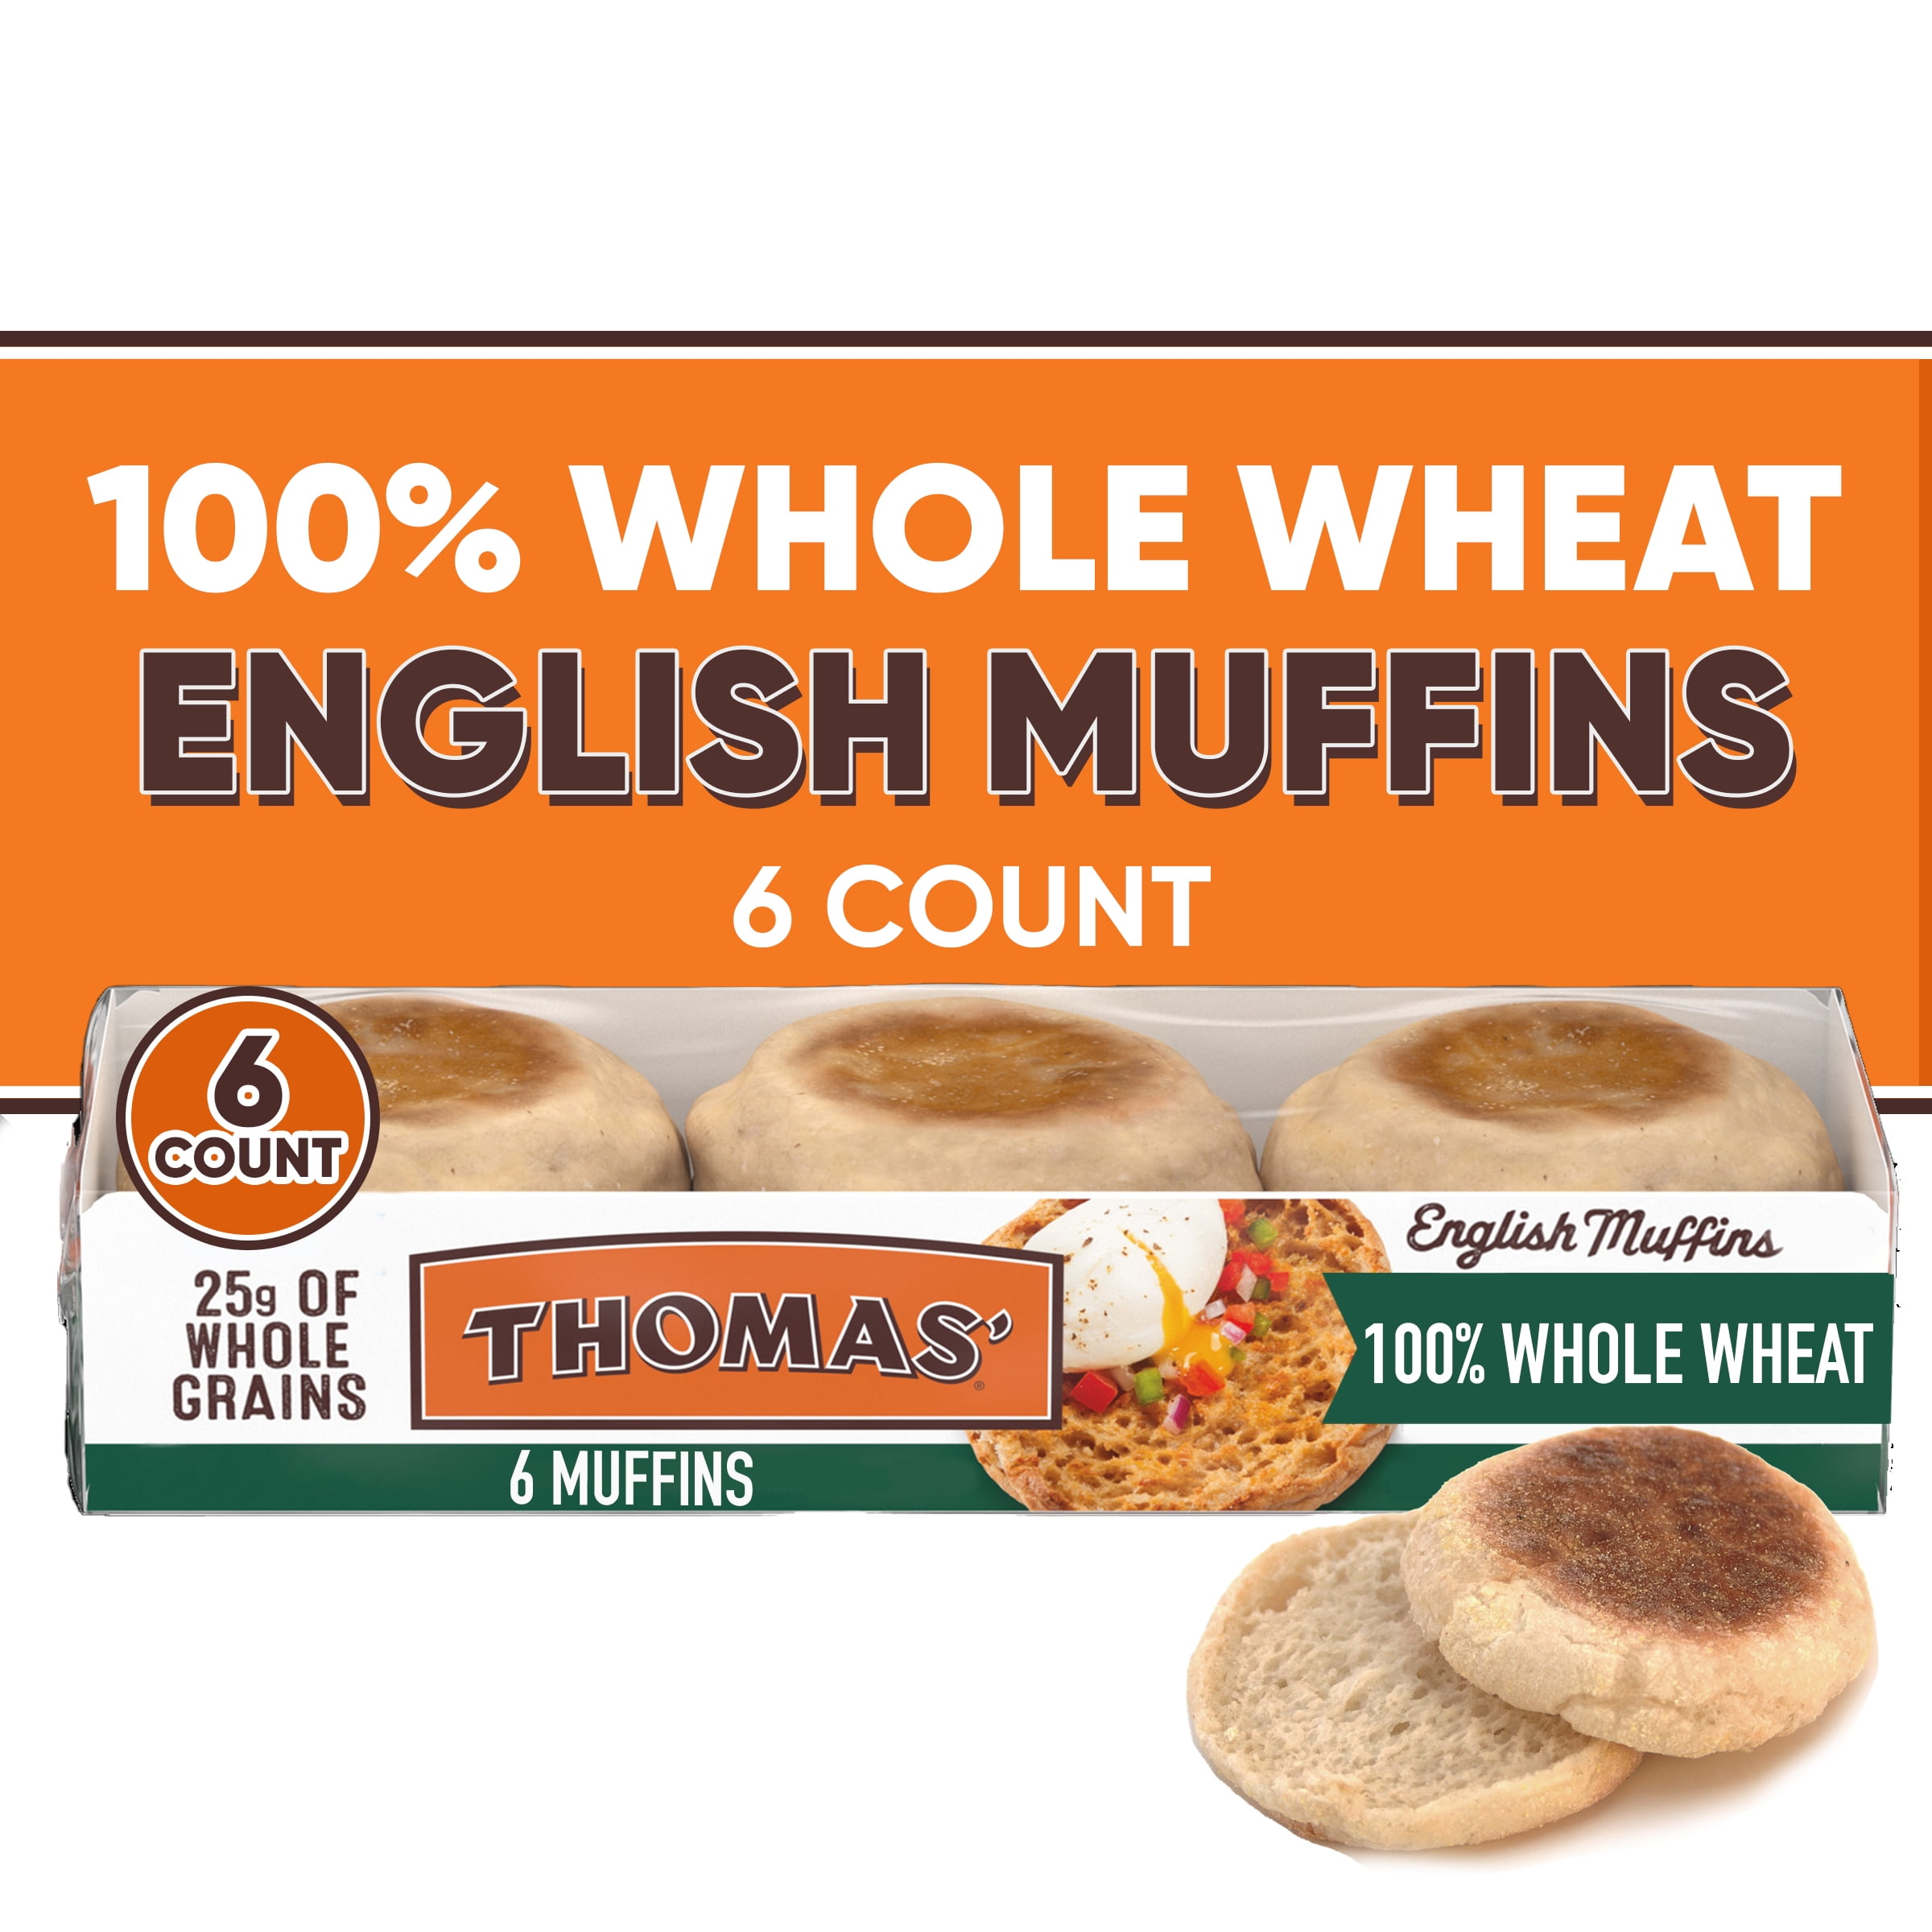 Thomas' 100% Whole Wheat English Muffin, Made with Whole Grains, 6 count, 12 oz